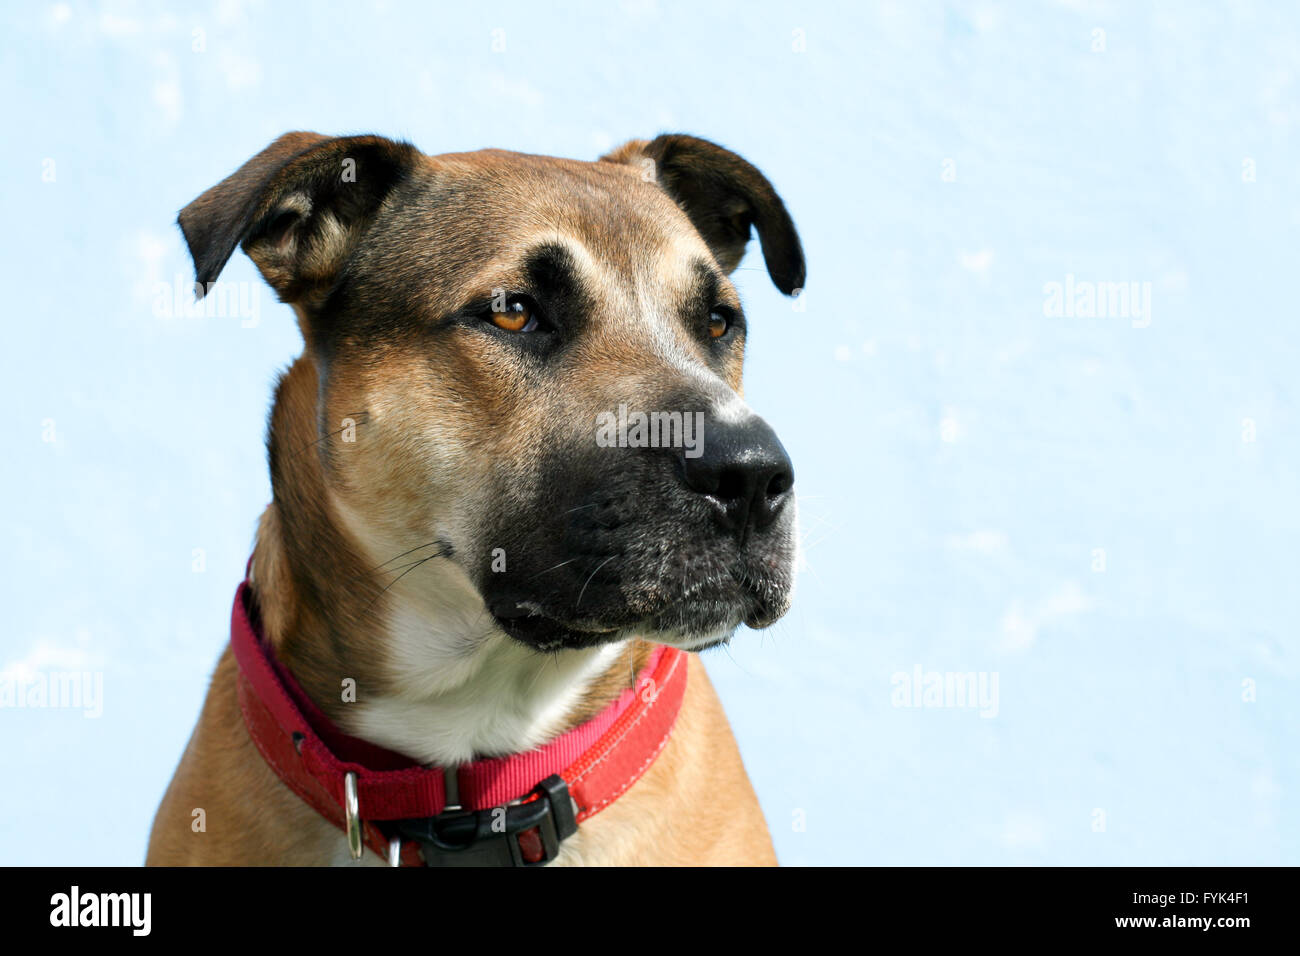 Beefy strong large mixed breed young dog with floppy ears, wearing a red collar looks to the right. Possibly a pit bull mix. Stock Photo